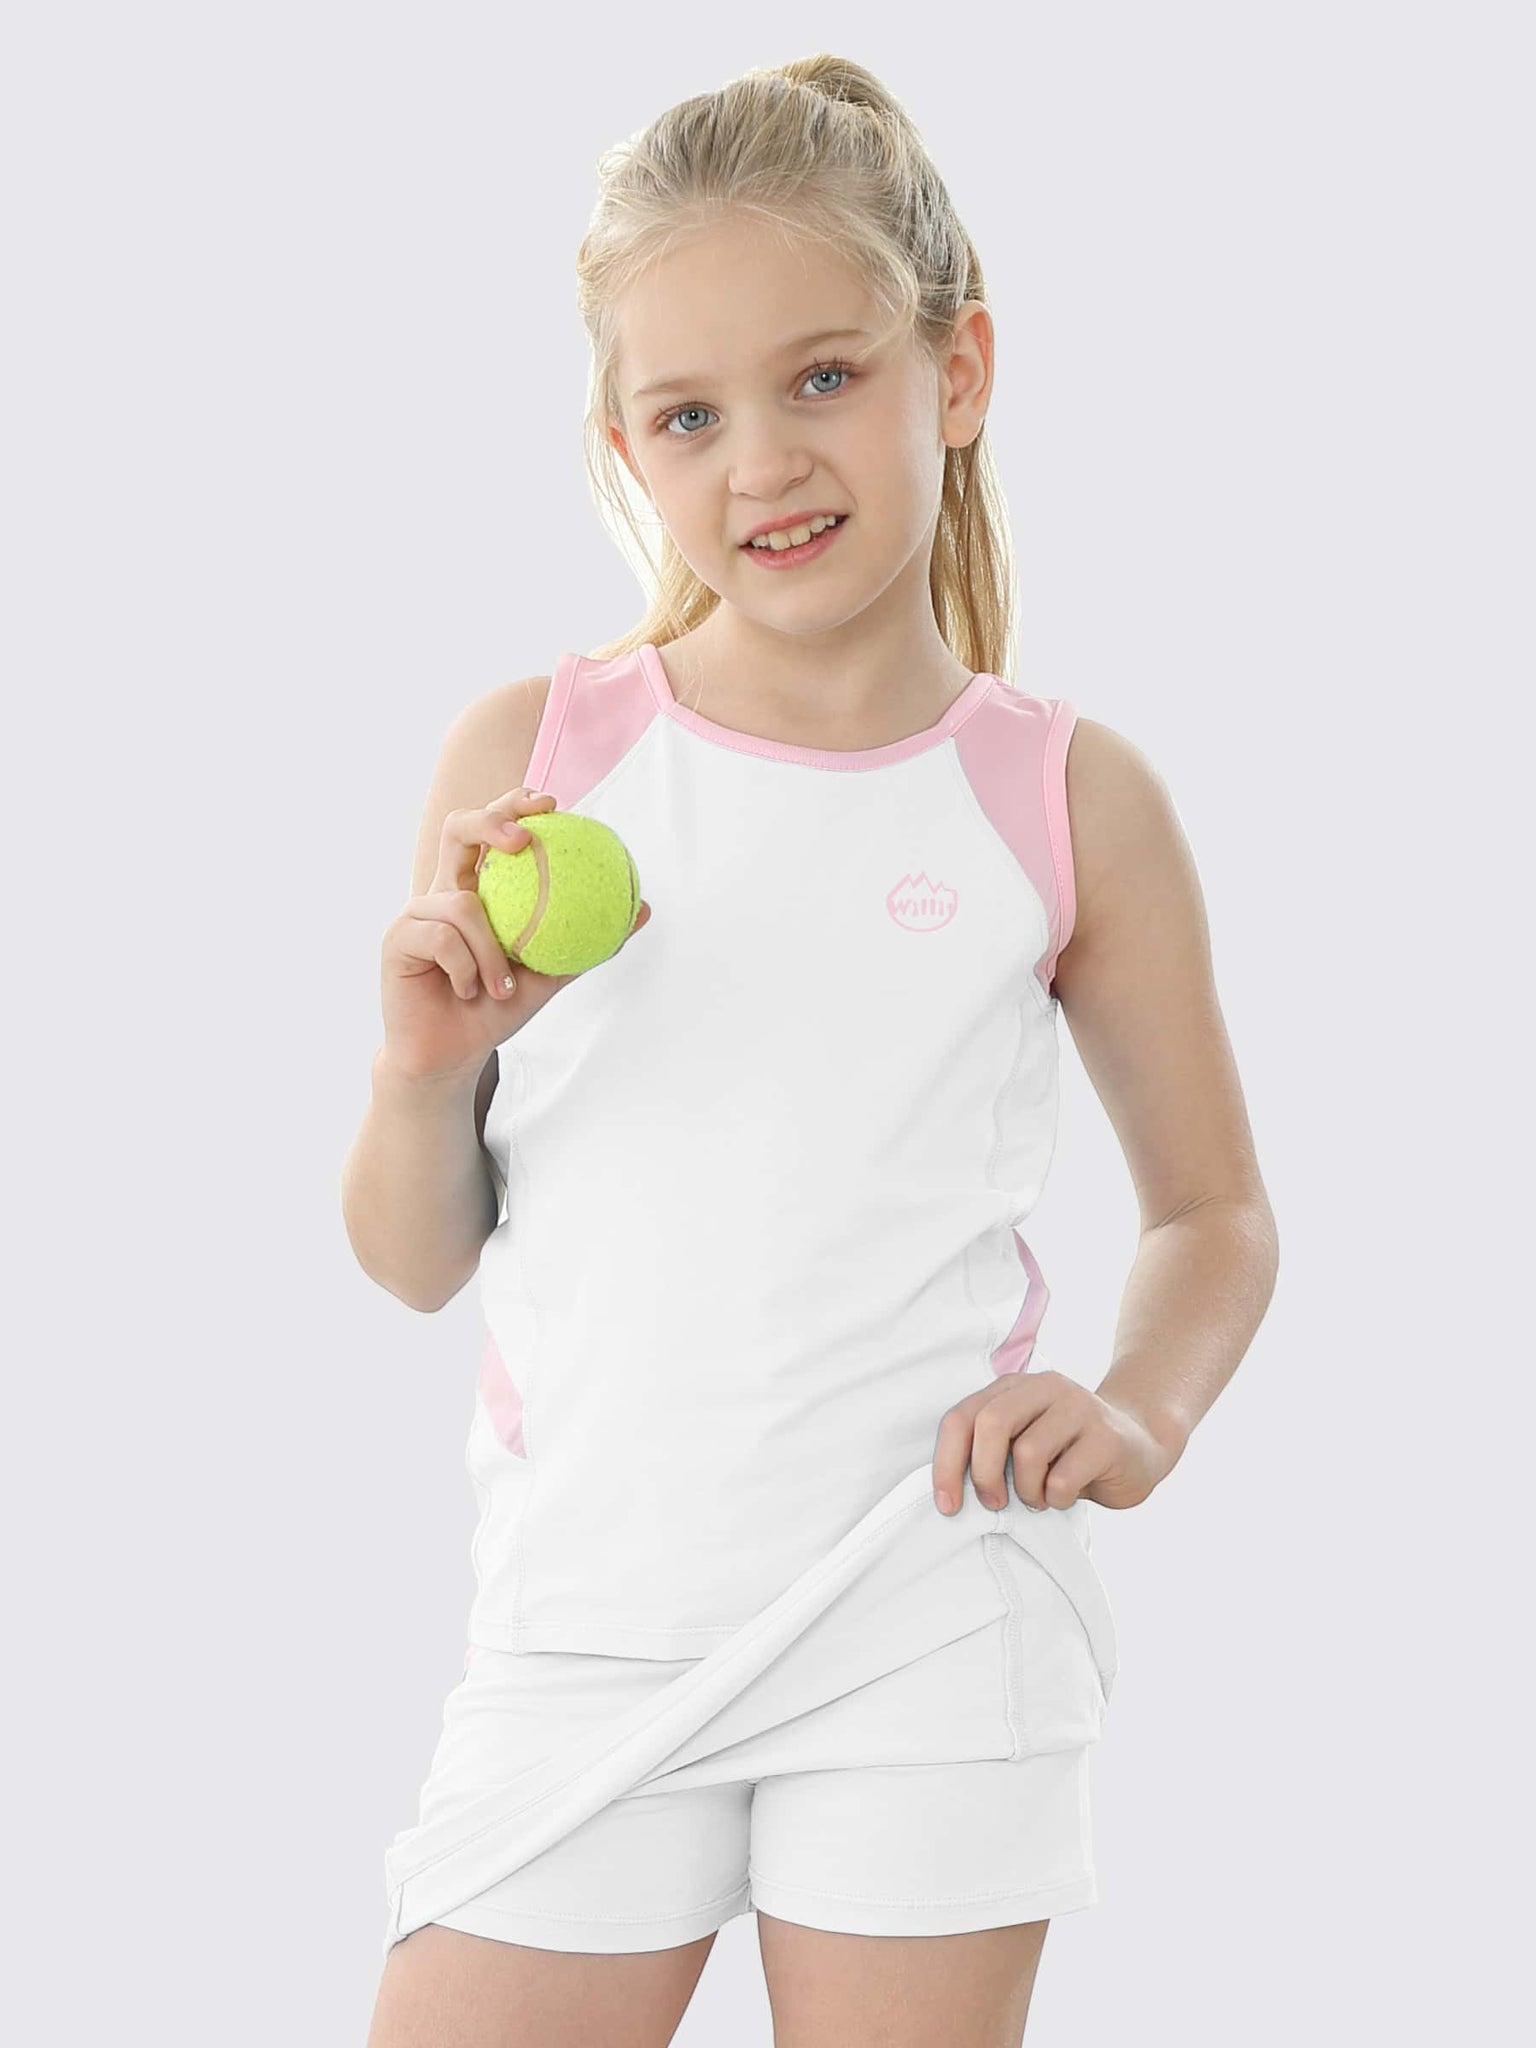 Willit Girls' Tennis Outfit_White_model3